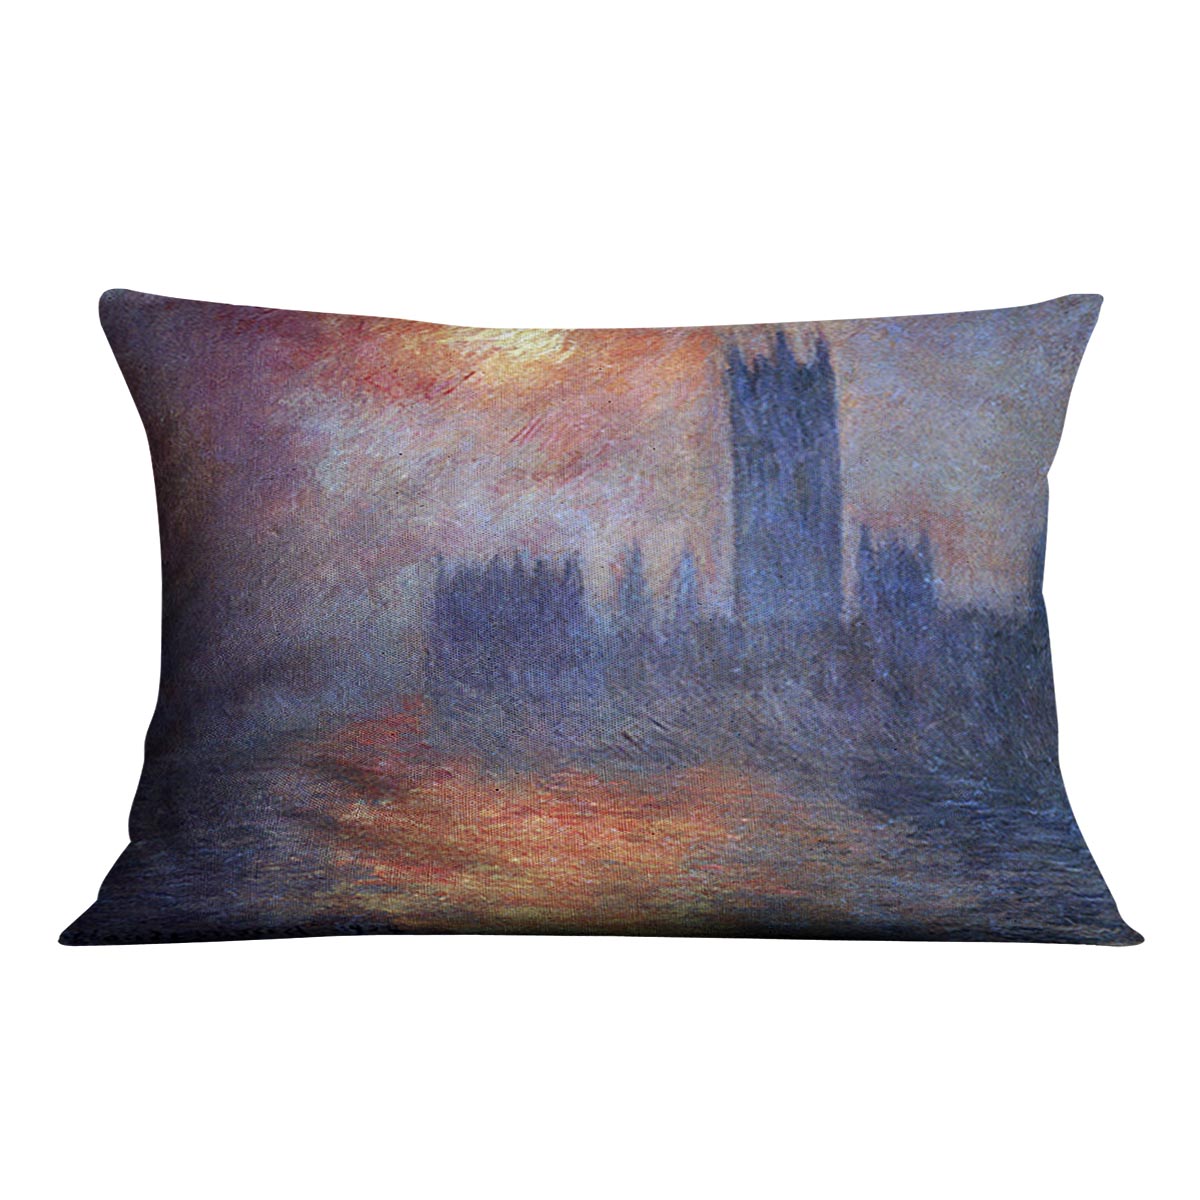 The Houses of Parliament Sunset by Monet Cushion